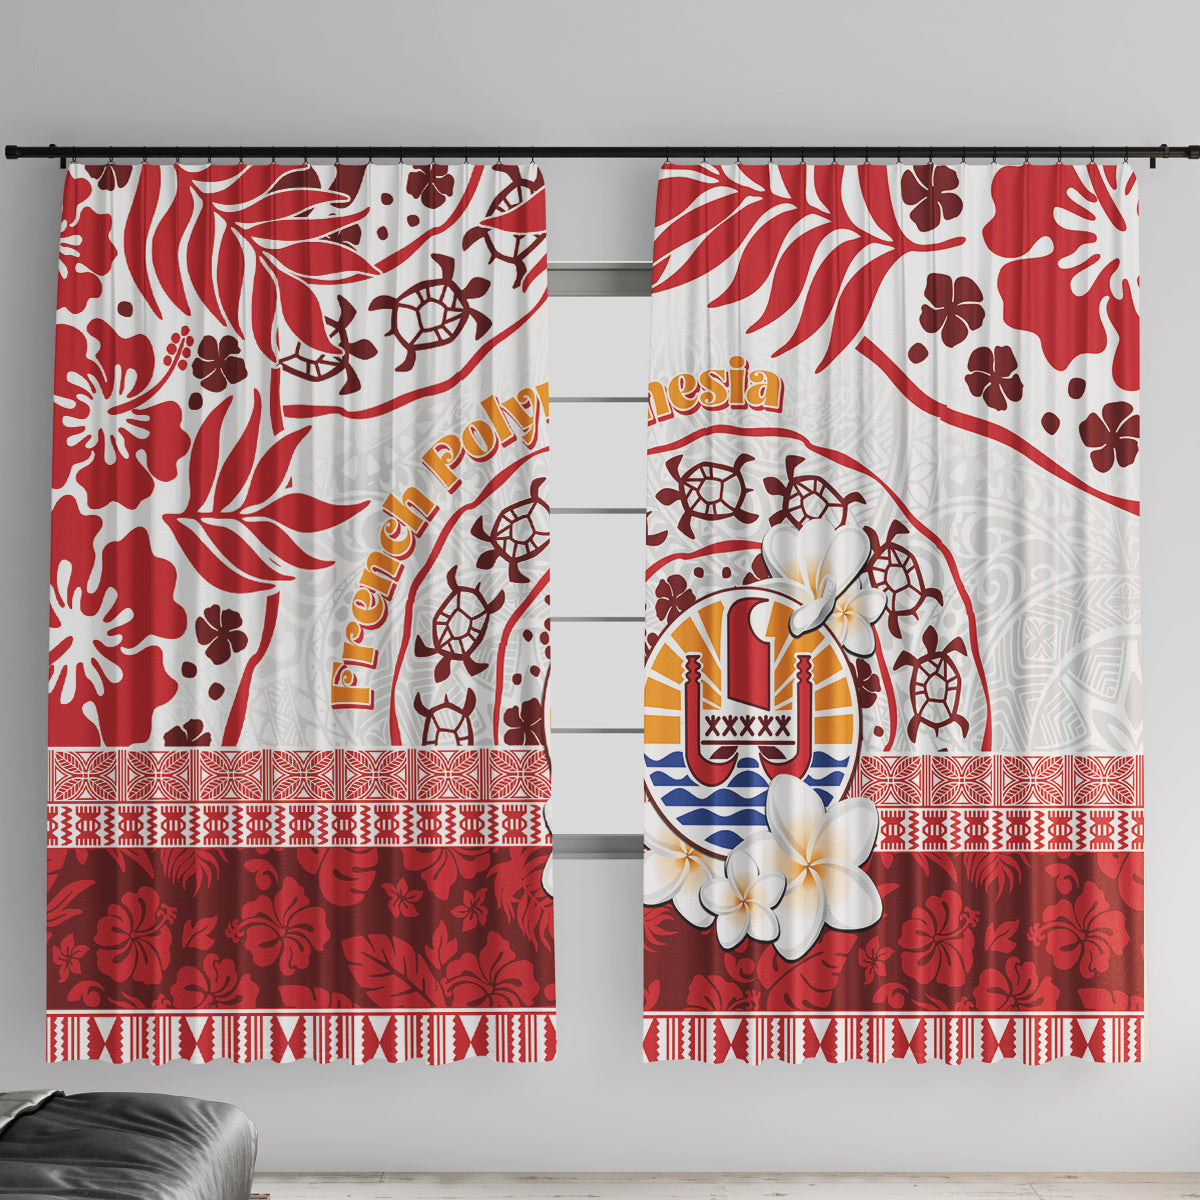 French Polynesia Internal Autonomy Day Window Curtain Tropical Hibiscus And Turtle Pattern